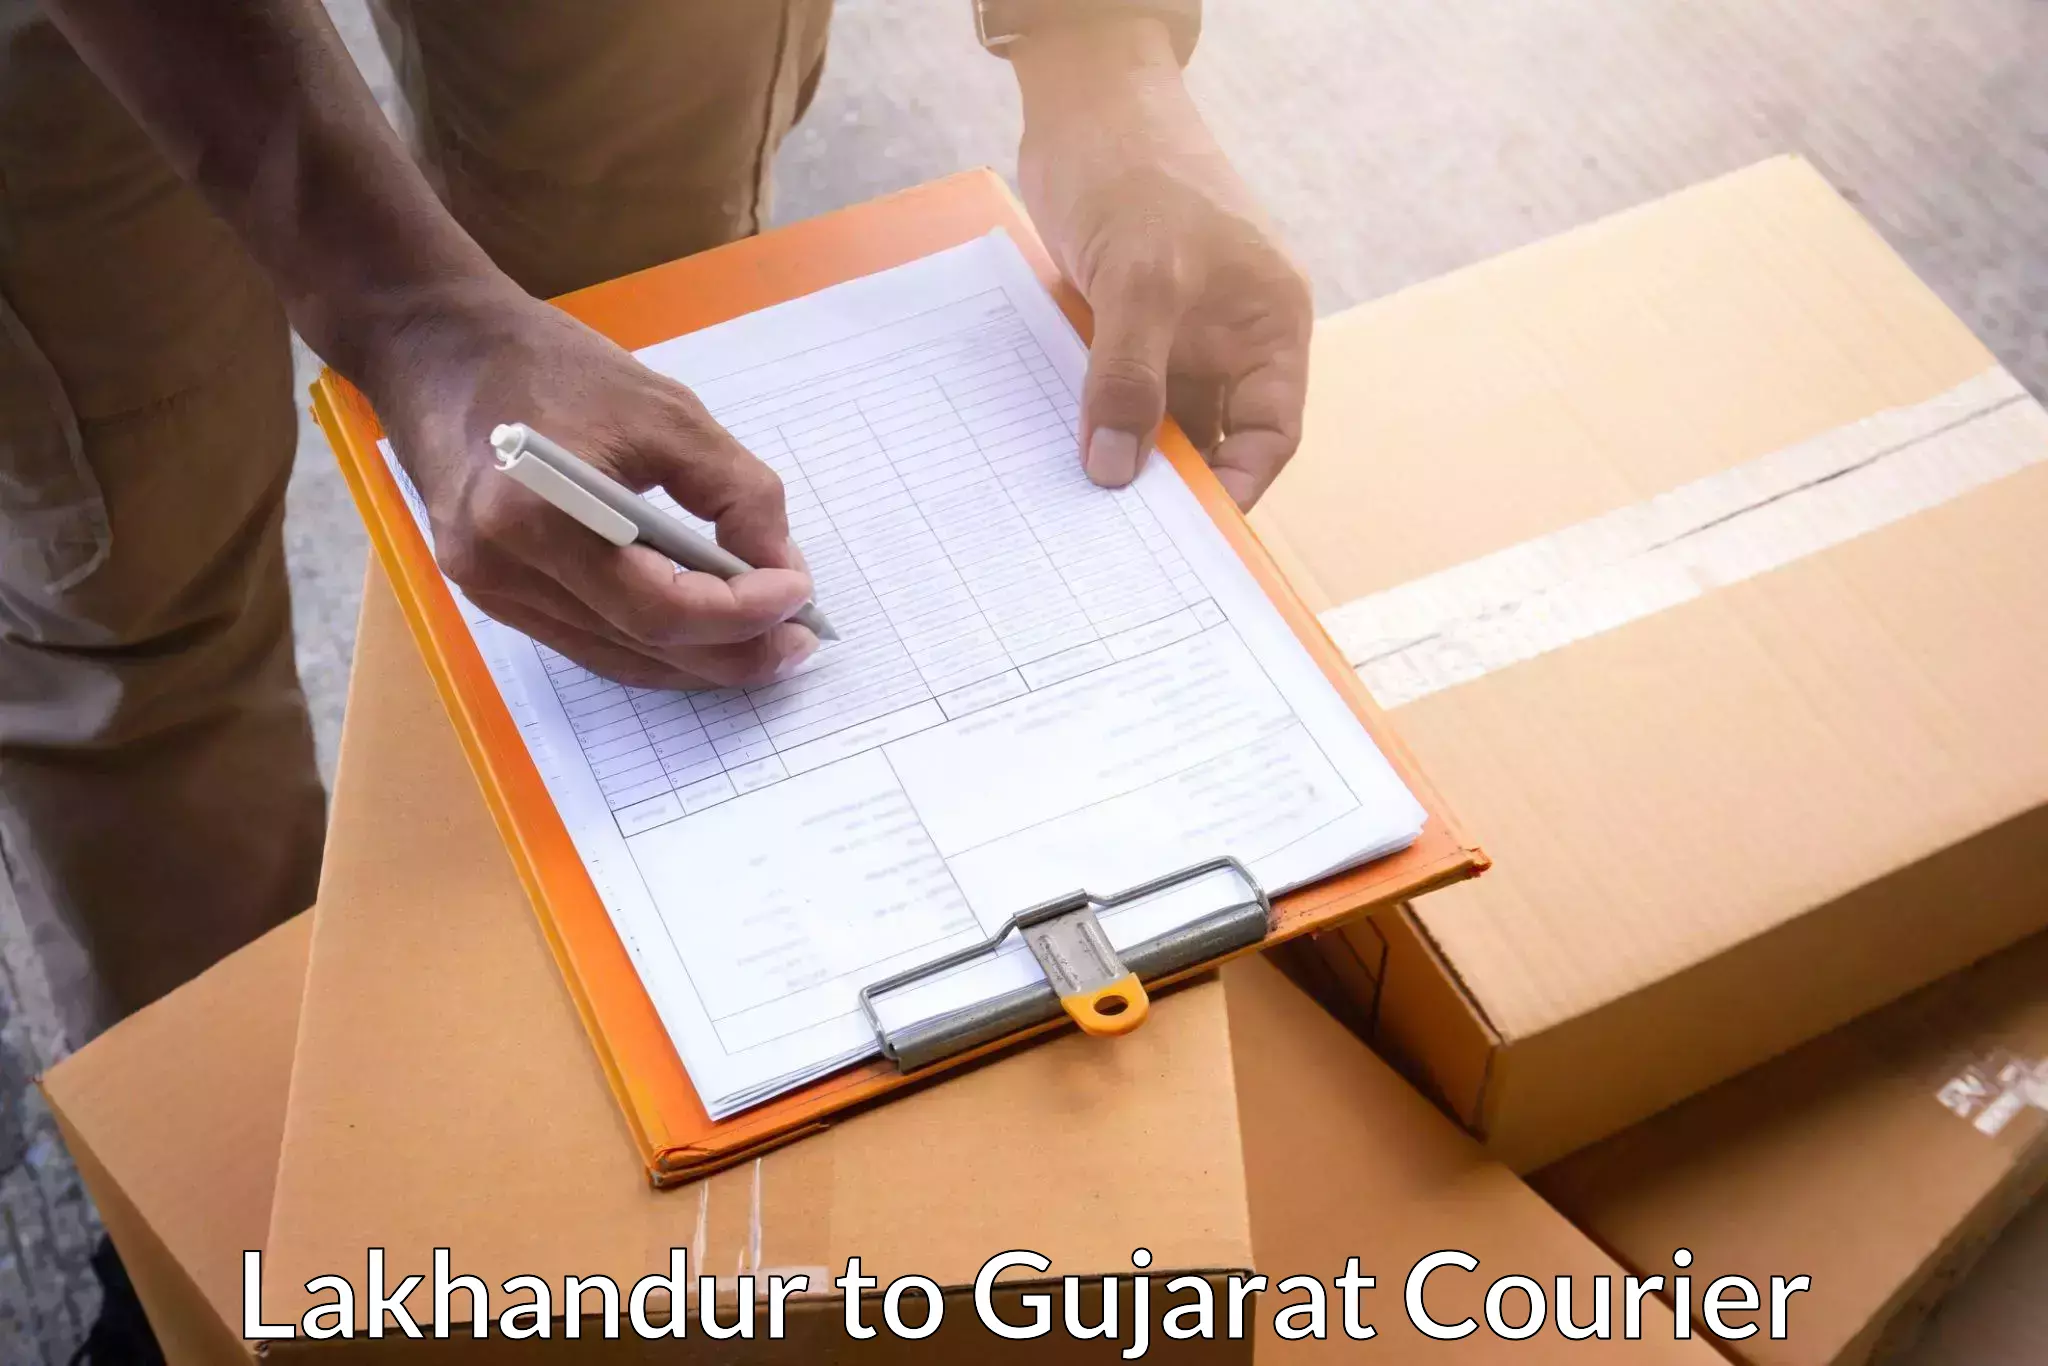 Track and trace shipping Lakhandur to Surat